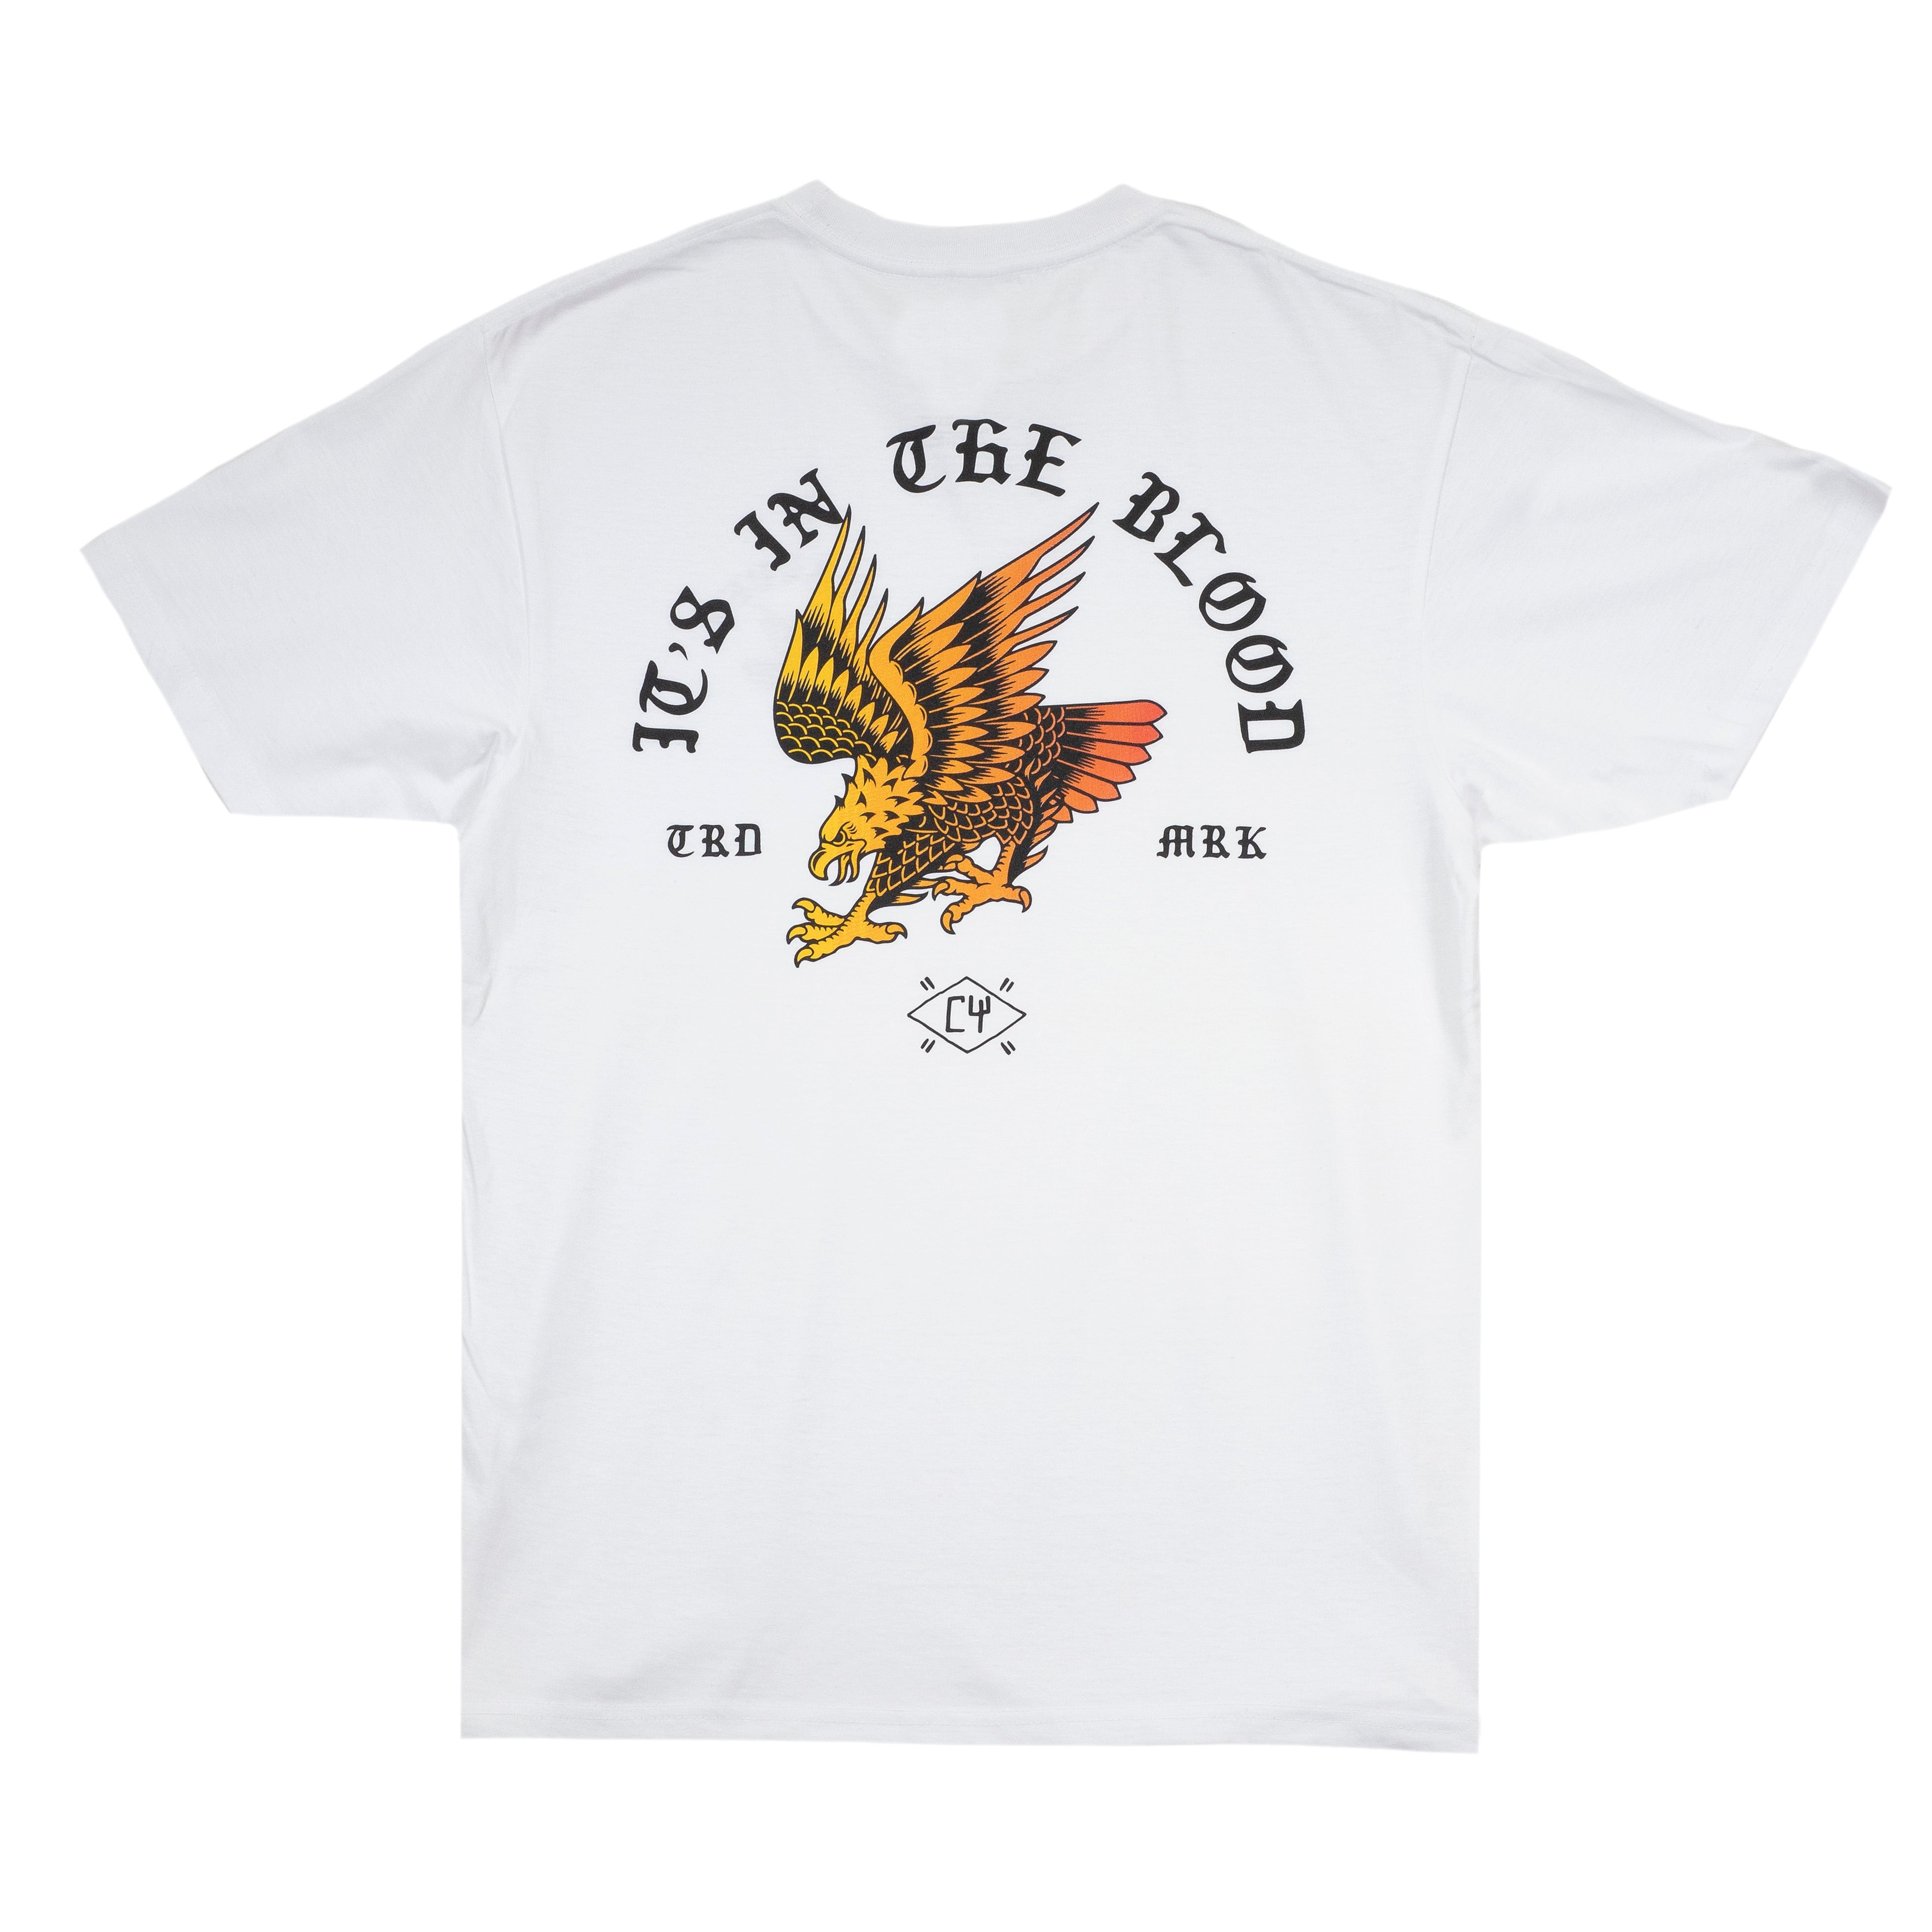 EAGLE BLOOD SS - commonyouthbrand